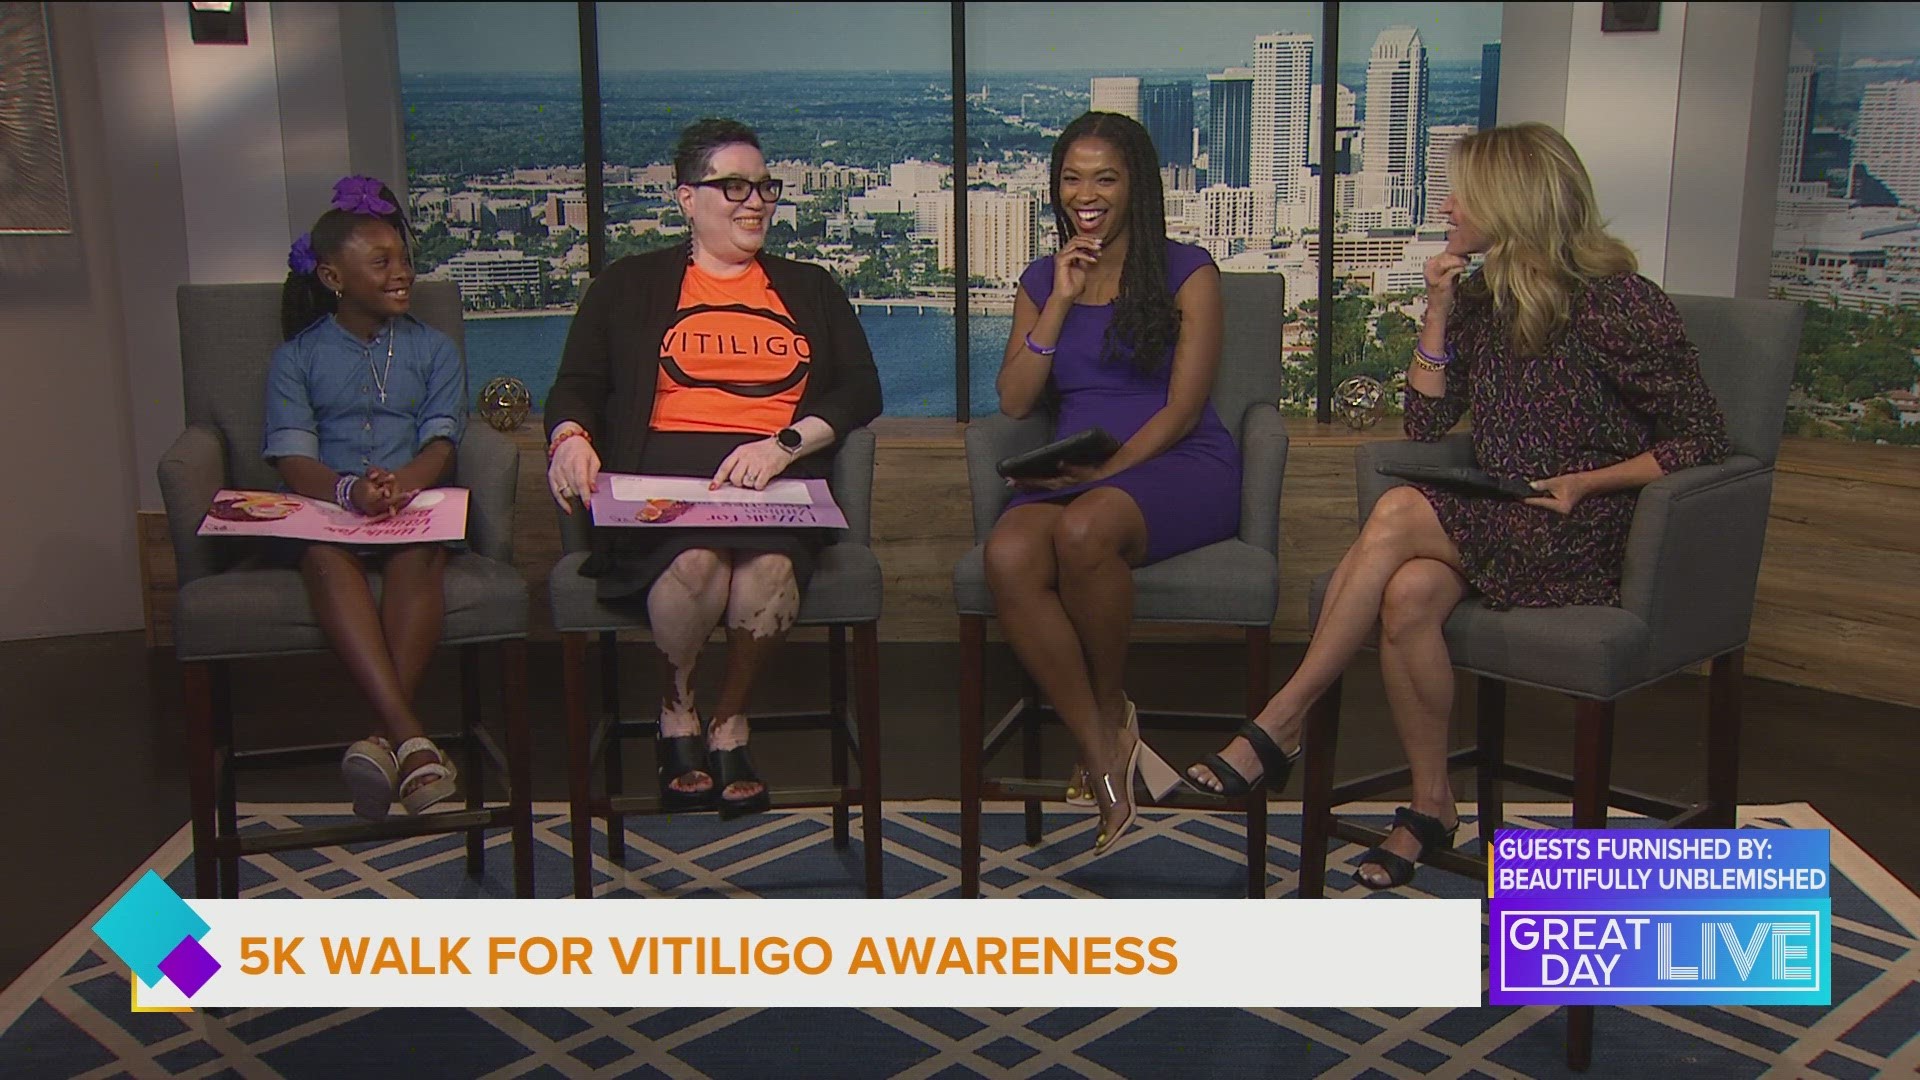 Beautifully Unblemished, a support group for Vitiligo, is hosting a walk-a-thon September 30th at Al Lopes Park in Tampa. For more: www.BeautifullyUnblemished.com